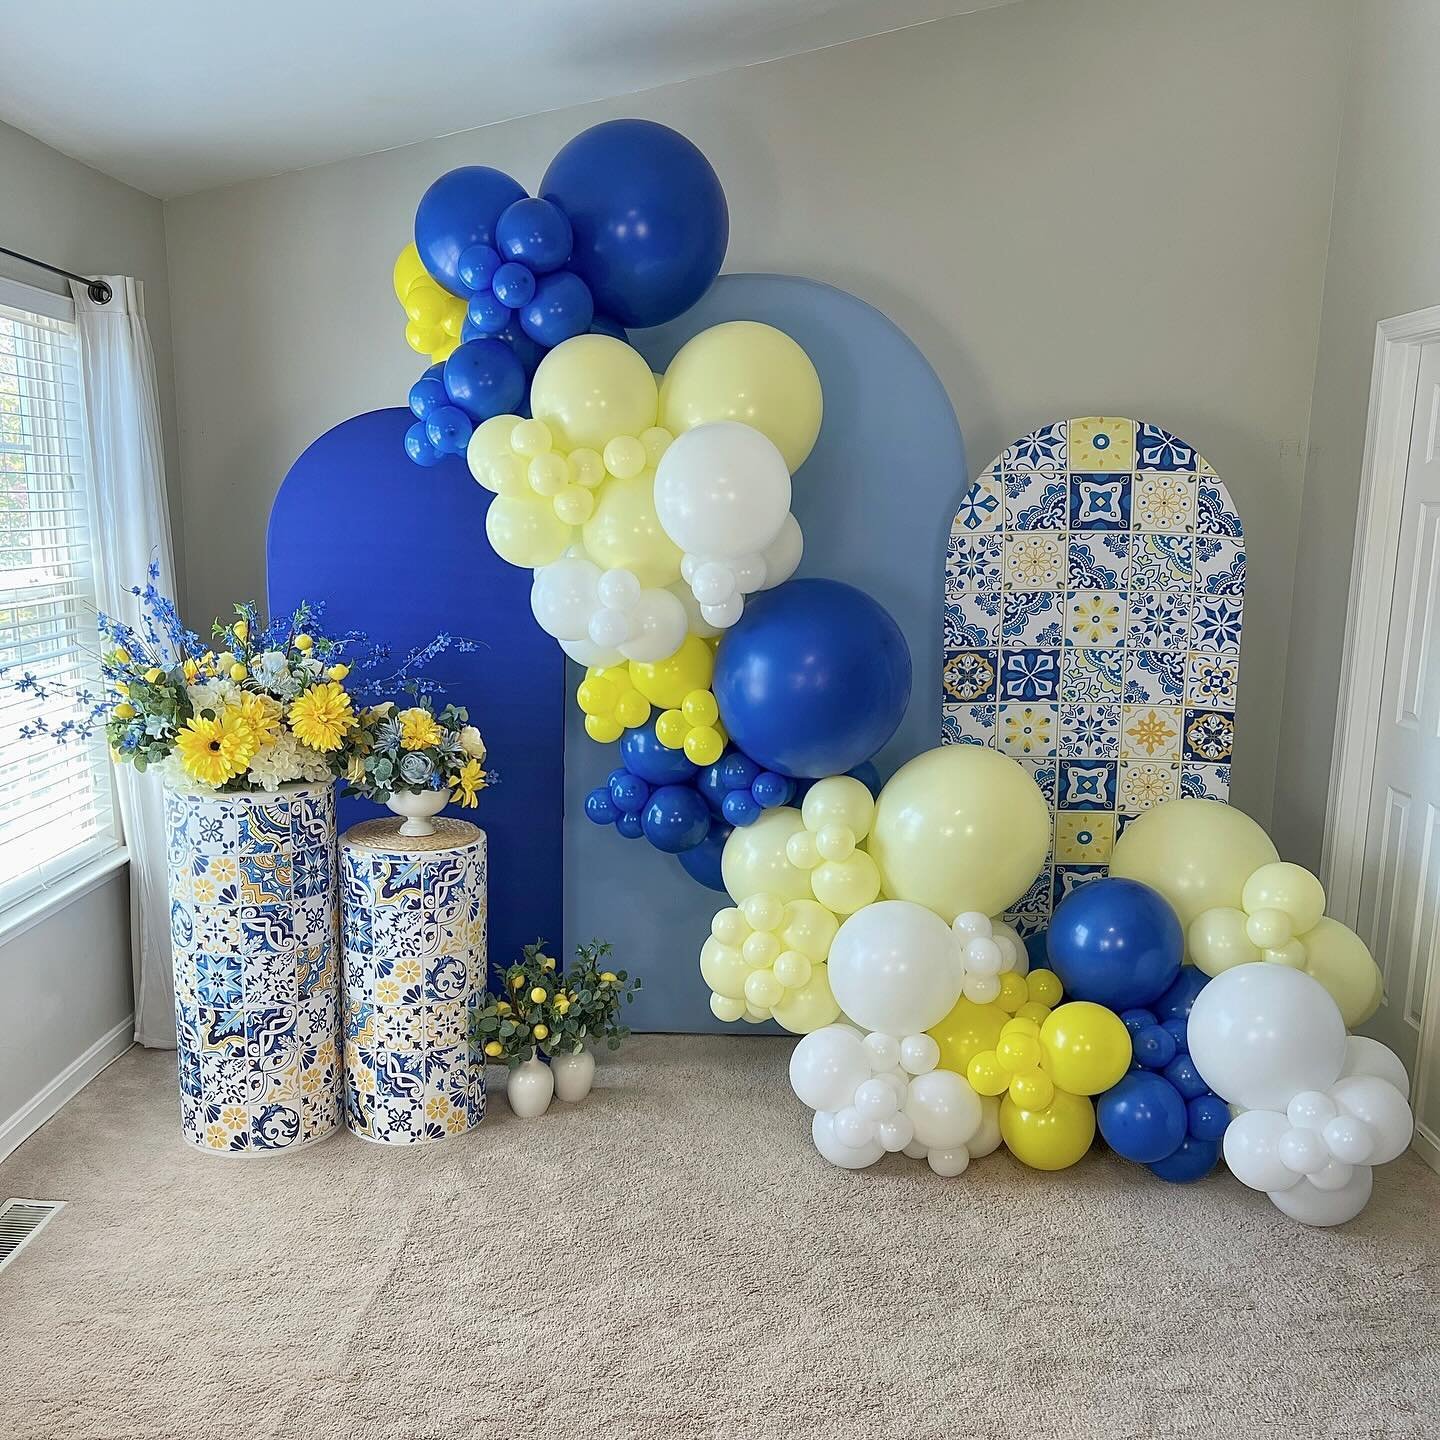 I have to get started on my next YouTube video&hellip;.But I don&rsquo;t want to take this down! I just LOVE this balloon backdrop. 💙💛

I really hope a client requests this so I can create this beauty again. But until then&hellip;I&rsquo;ll just ha